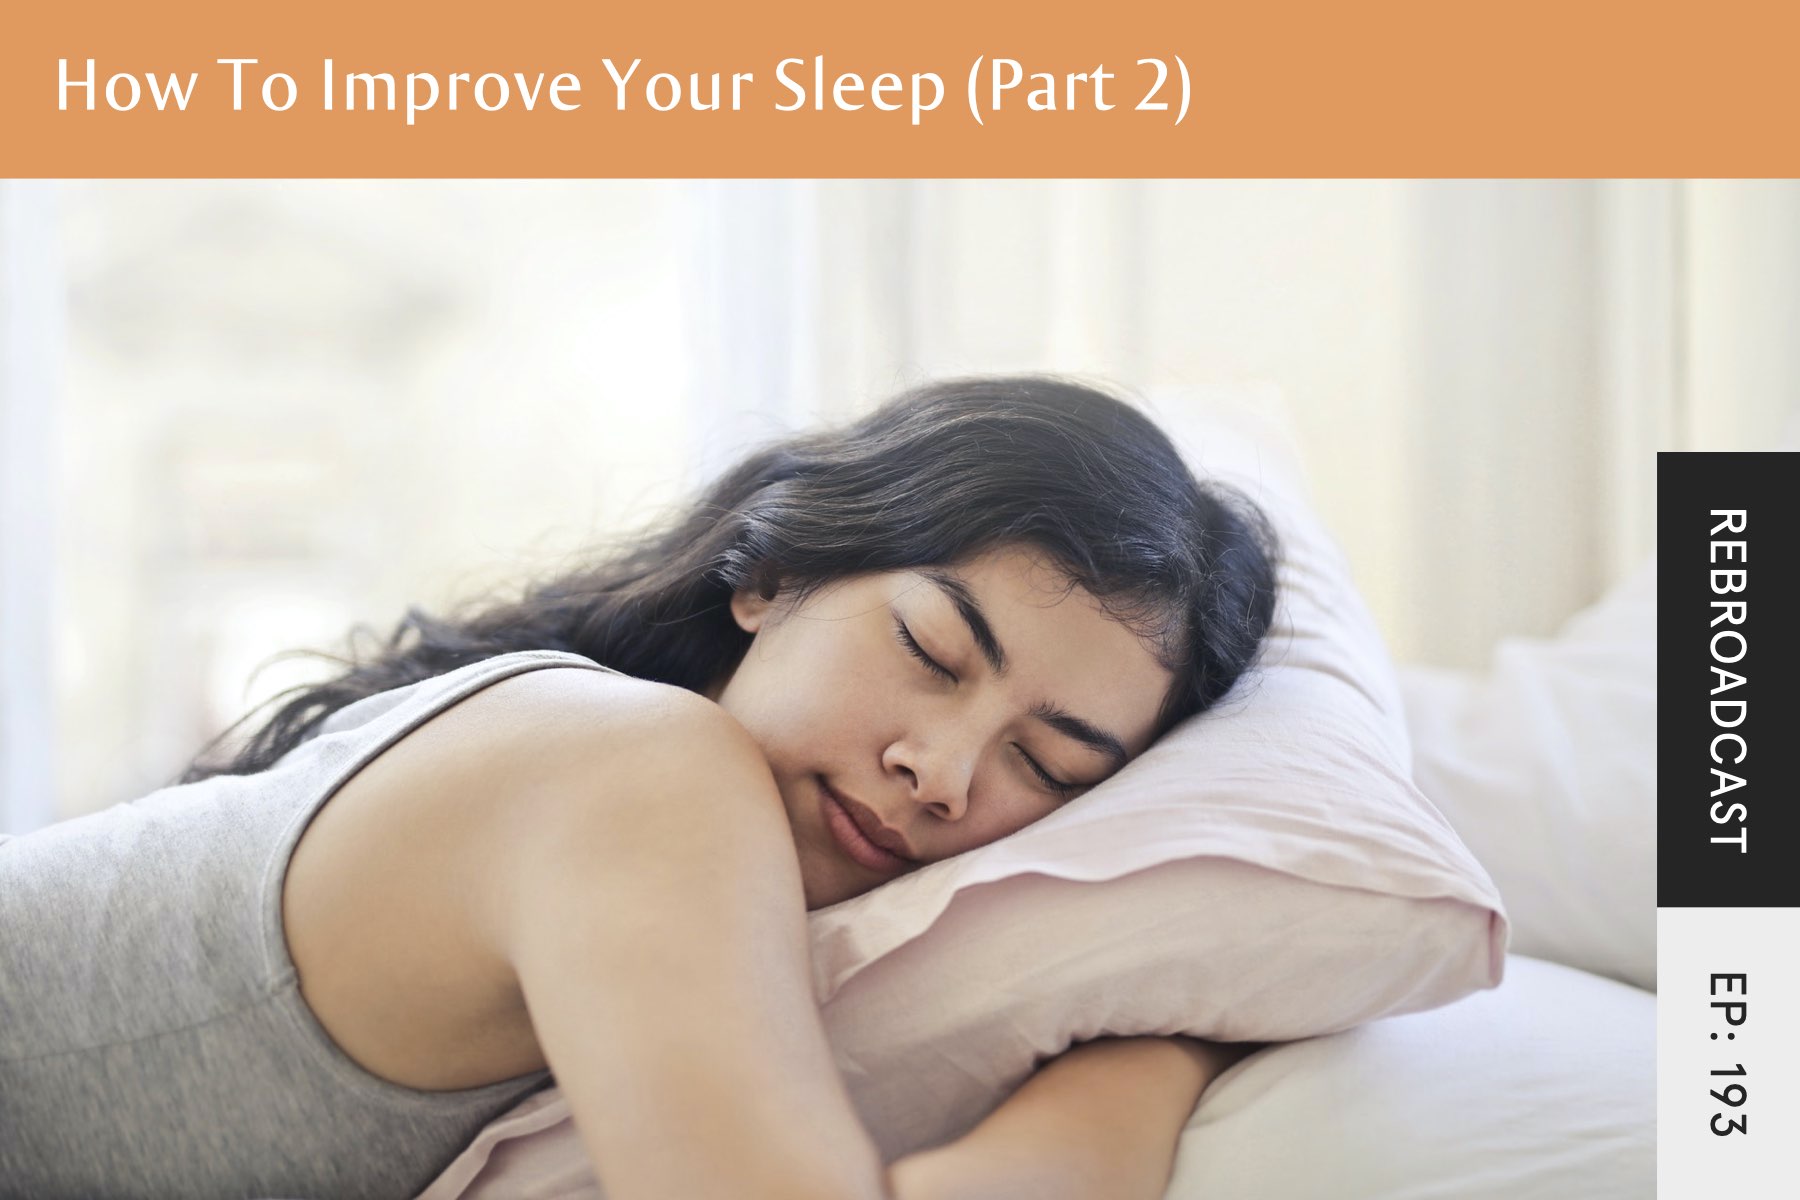 Rebroadcast: How To Improve Your Sleep, Pt. 2 (2nd Edition) - Seven Health: Eating Disorder Recovery and Anti Diet Nutritionist